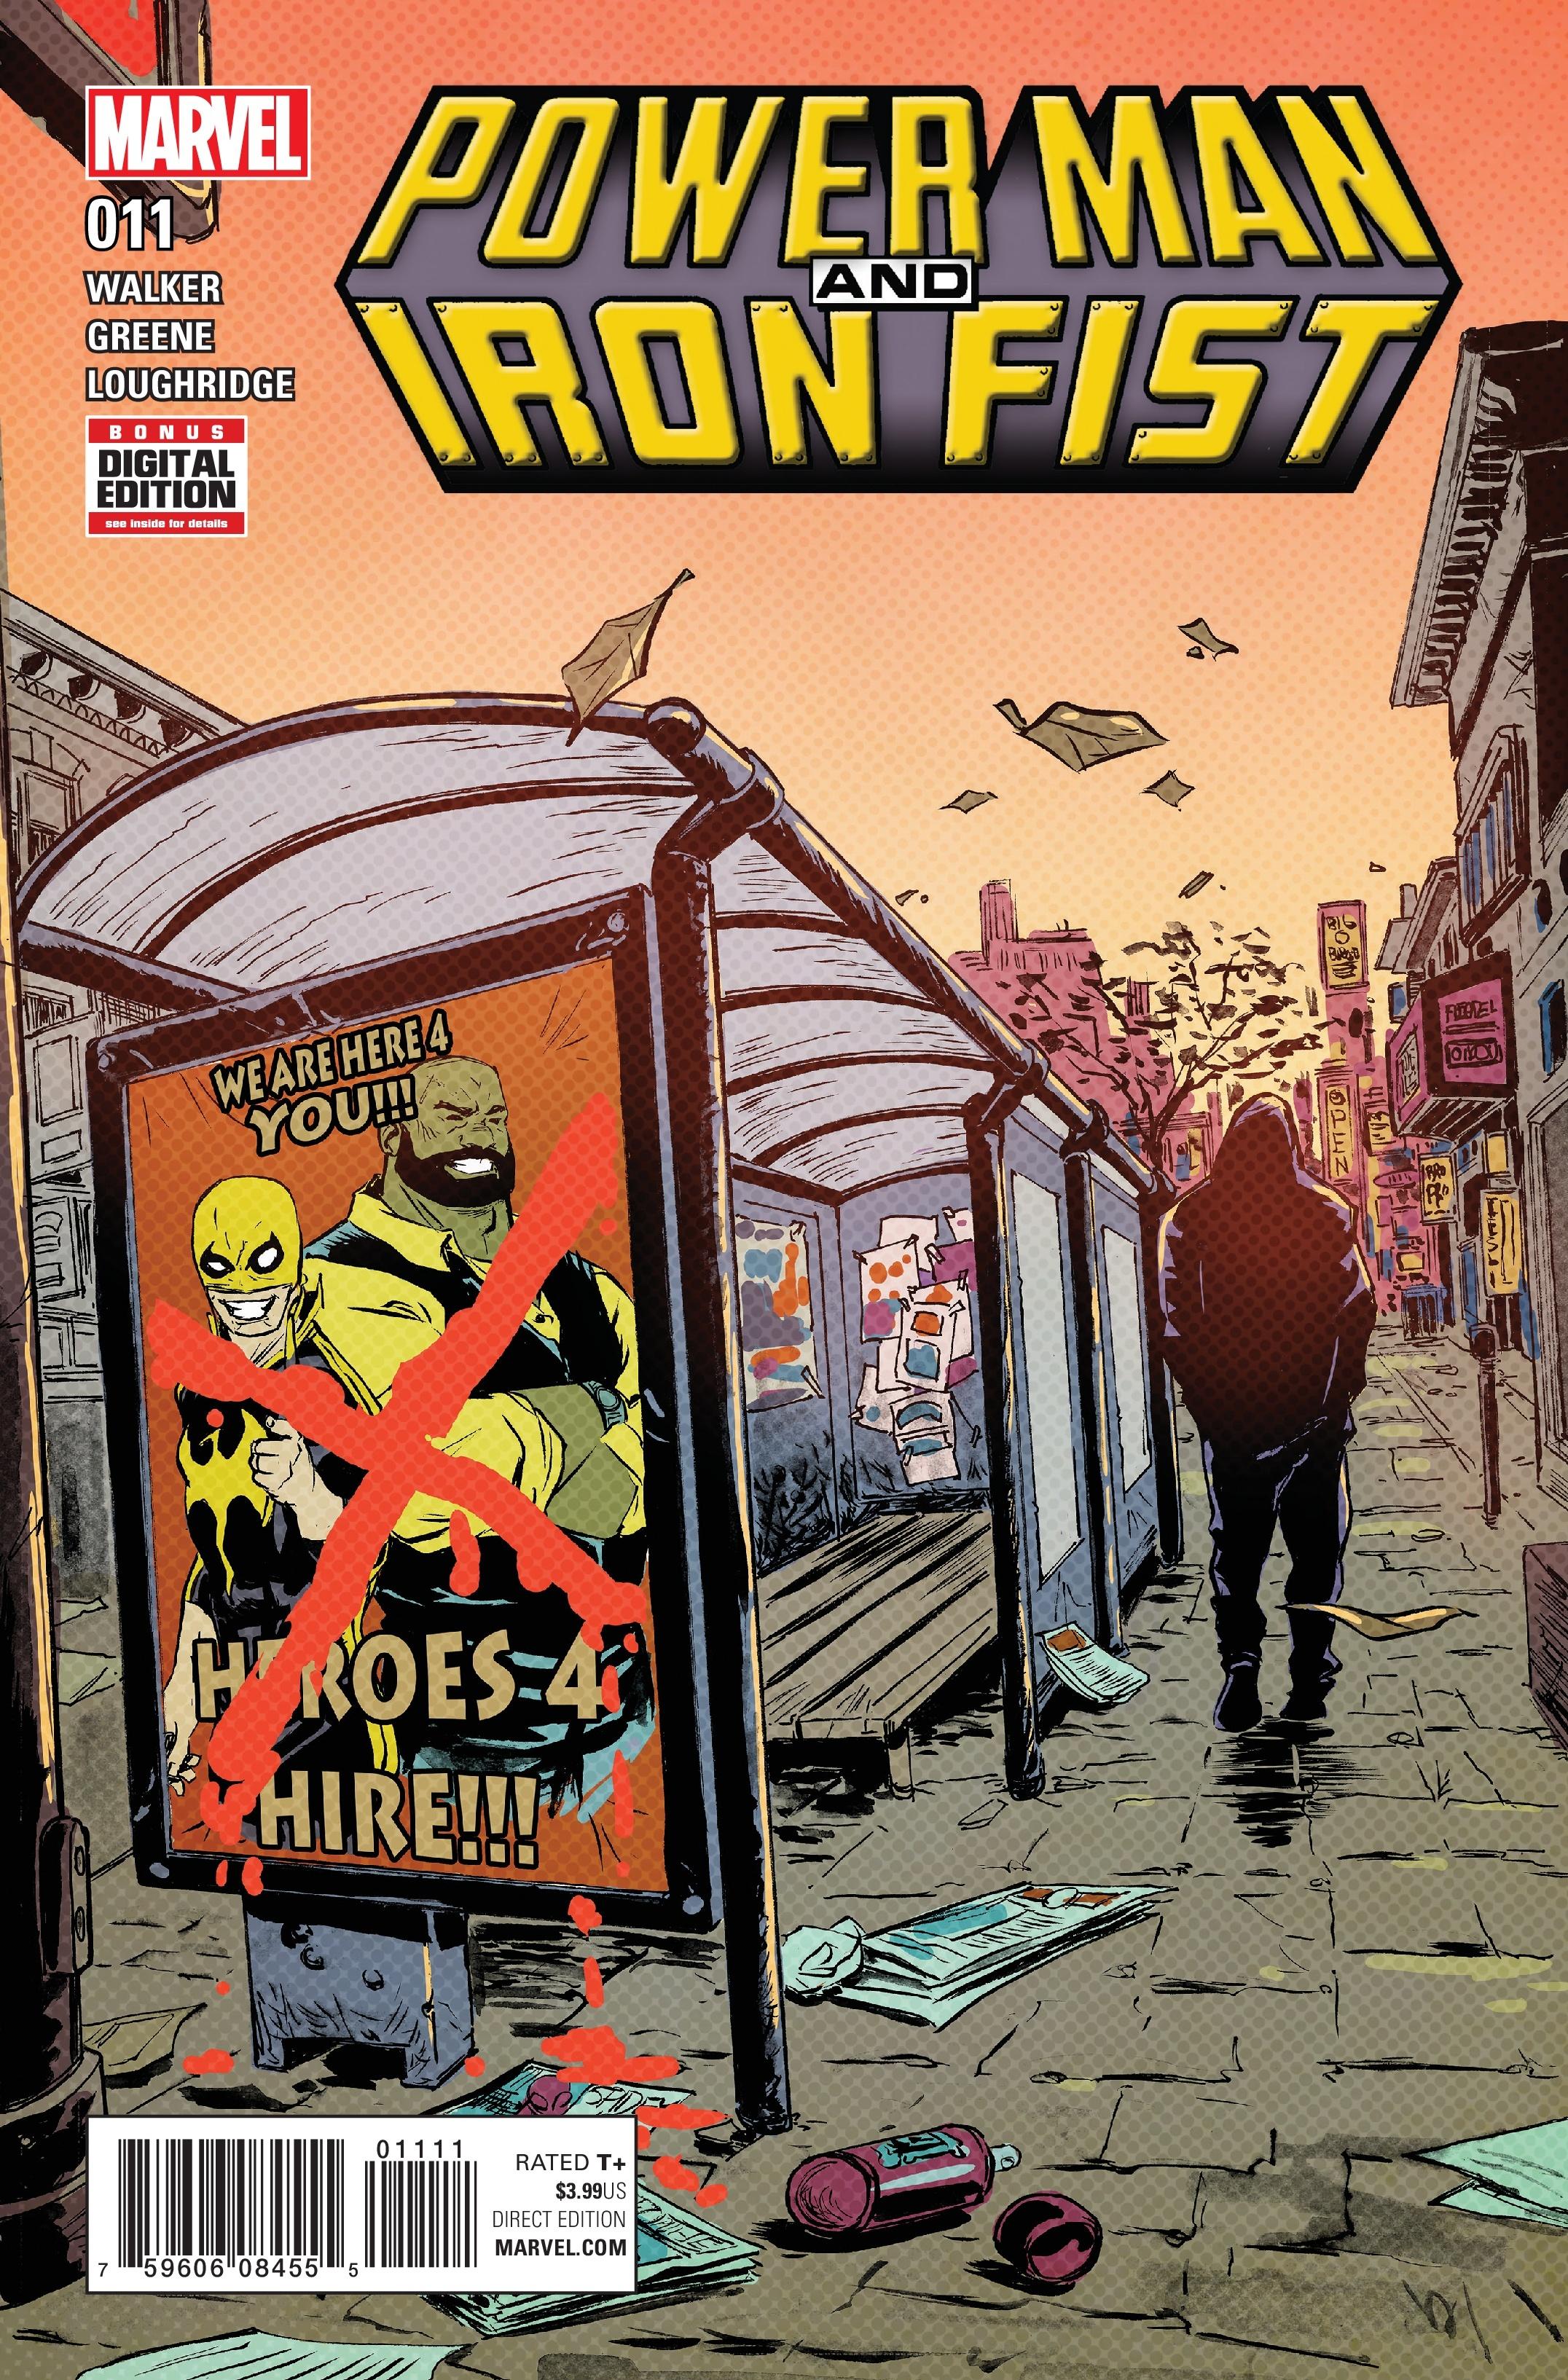 Power Man and Iron Fist Vol. 3 #11